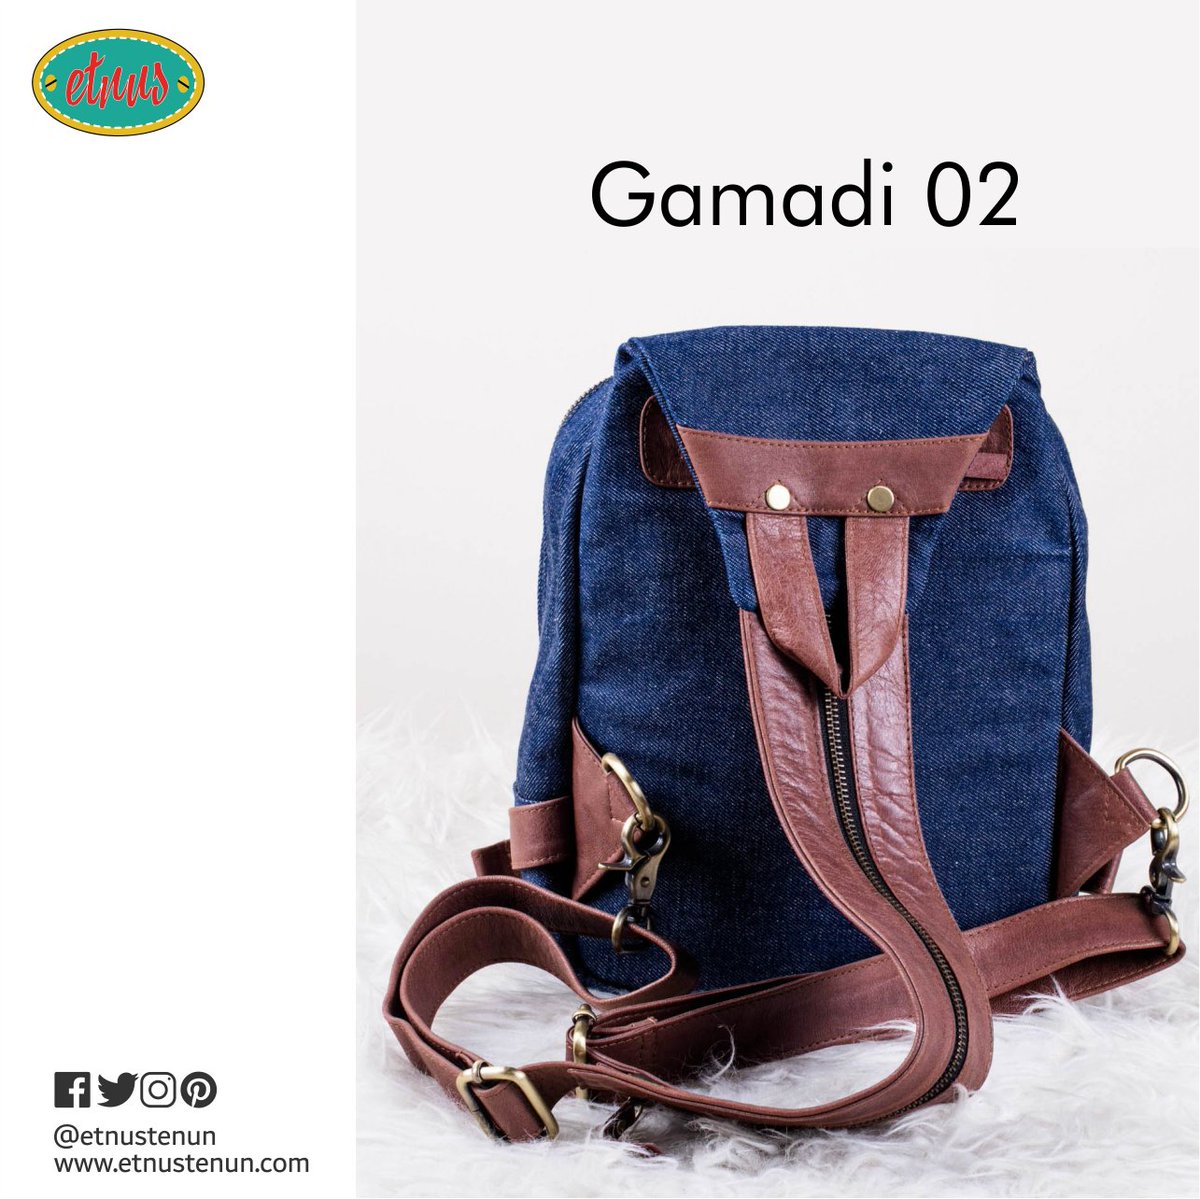 Looking for the perfect backpack but want a crossbody bag, too? Search Gamadi; you’ll wear for years to come.

#casualbag

#backpackforwoman

#casualbackpack

#casualstyle

#ethnicstyle

#denimbag

#tasetnik

#tasranselwanita

#giniginigoonline

etnustenun.com/woven-bags/gam…